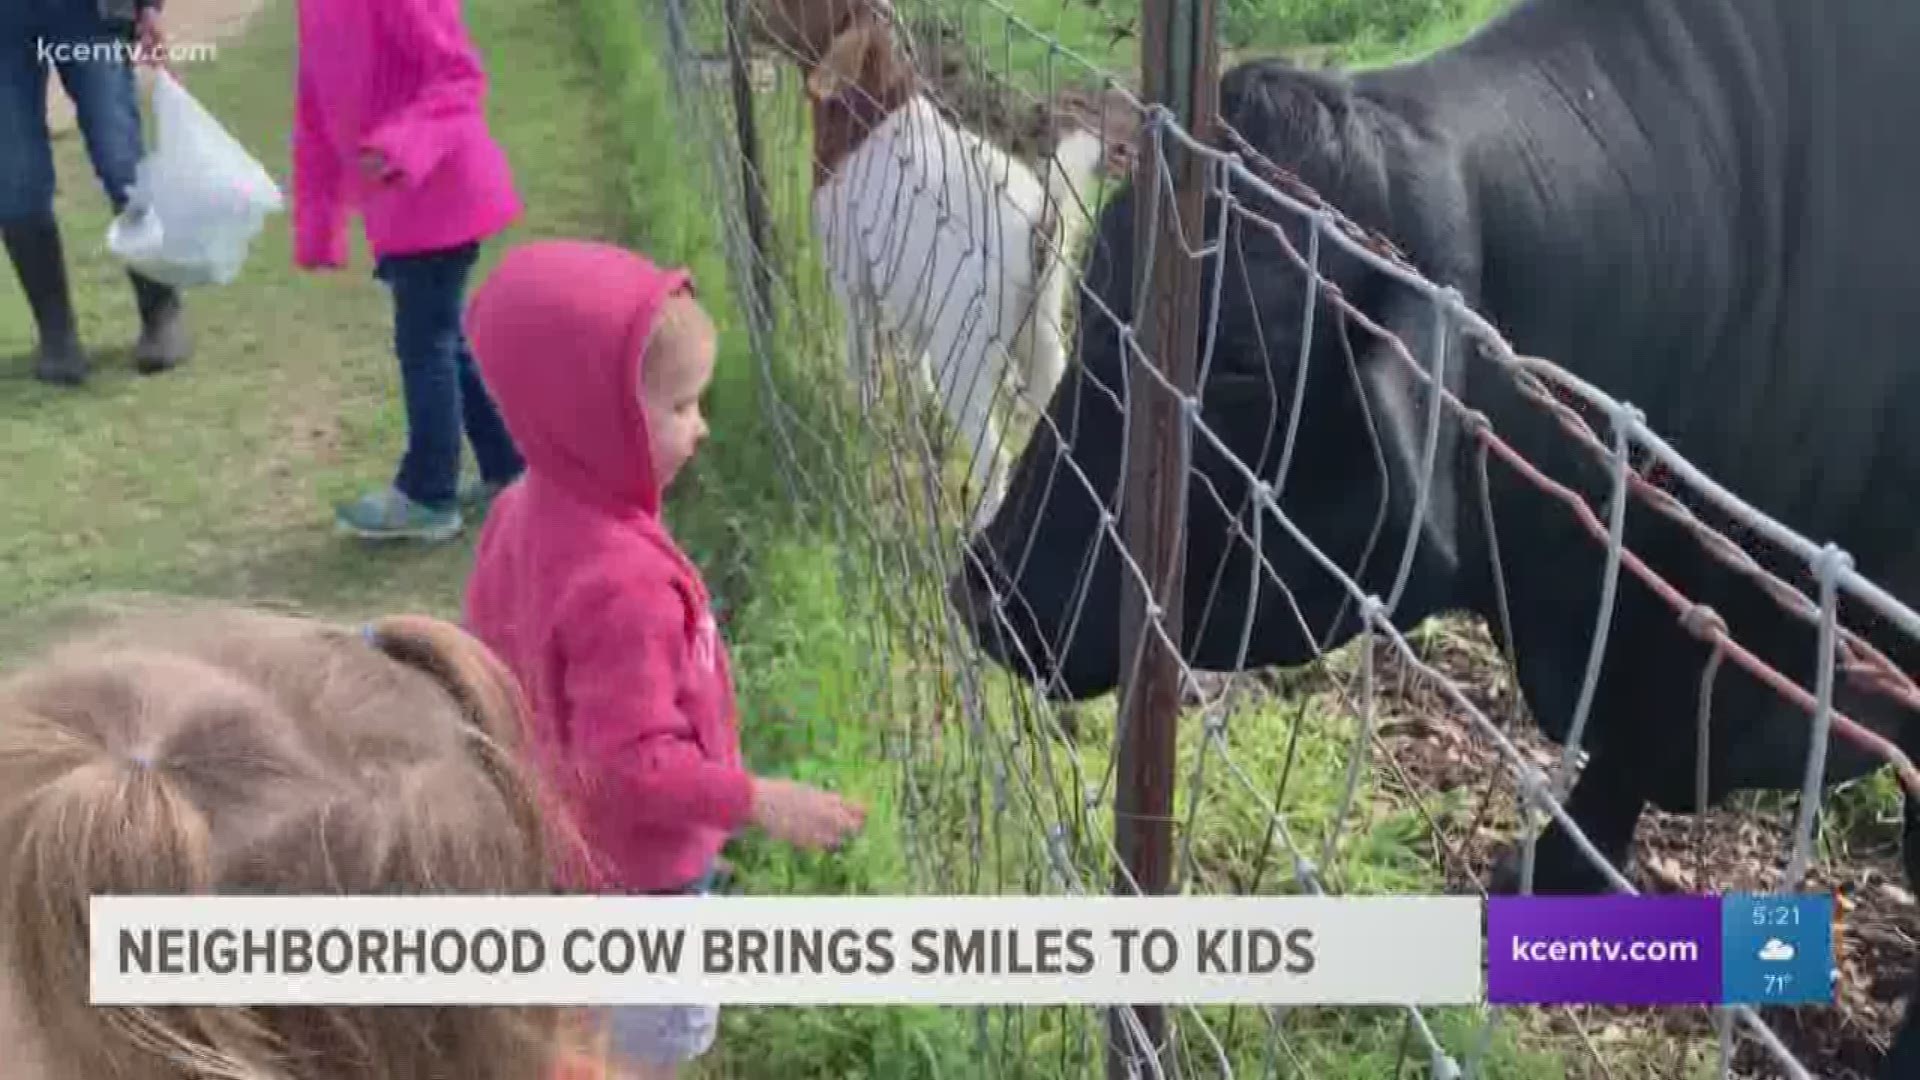 "All the kids love to come see her." | Kids flock to the neighborhood in the afternoon to pet and feed Daisy.